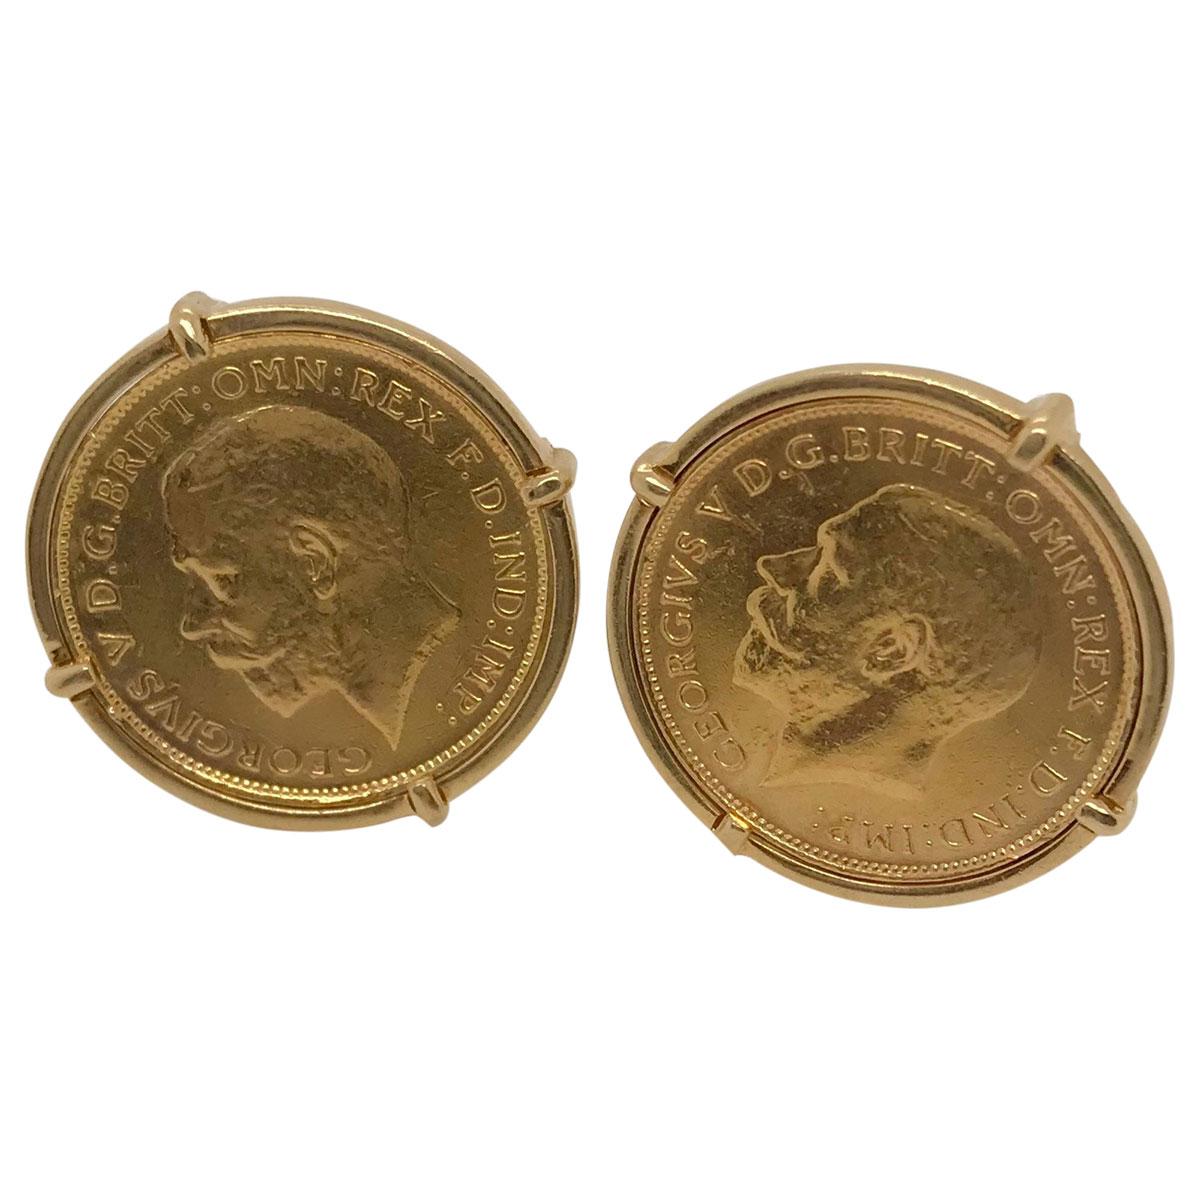 Featuring 18k yellow gold St George V half sovereign coins as the centrepoint of these stylish cufflinks. A unisex design that can be worn on a gents or ladies business shirt or for even more informal attire. The coins are mounted in 18k yellow gold